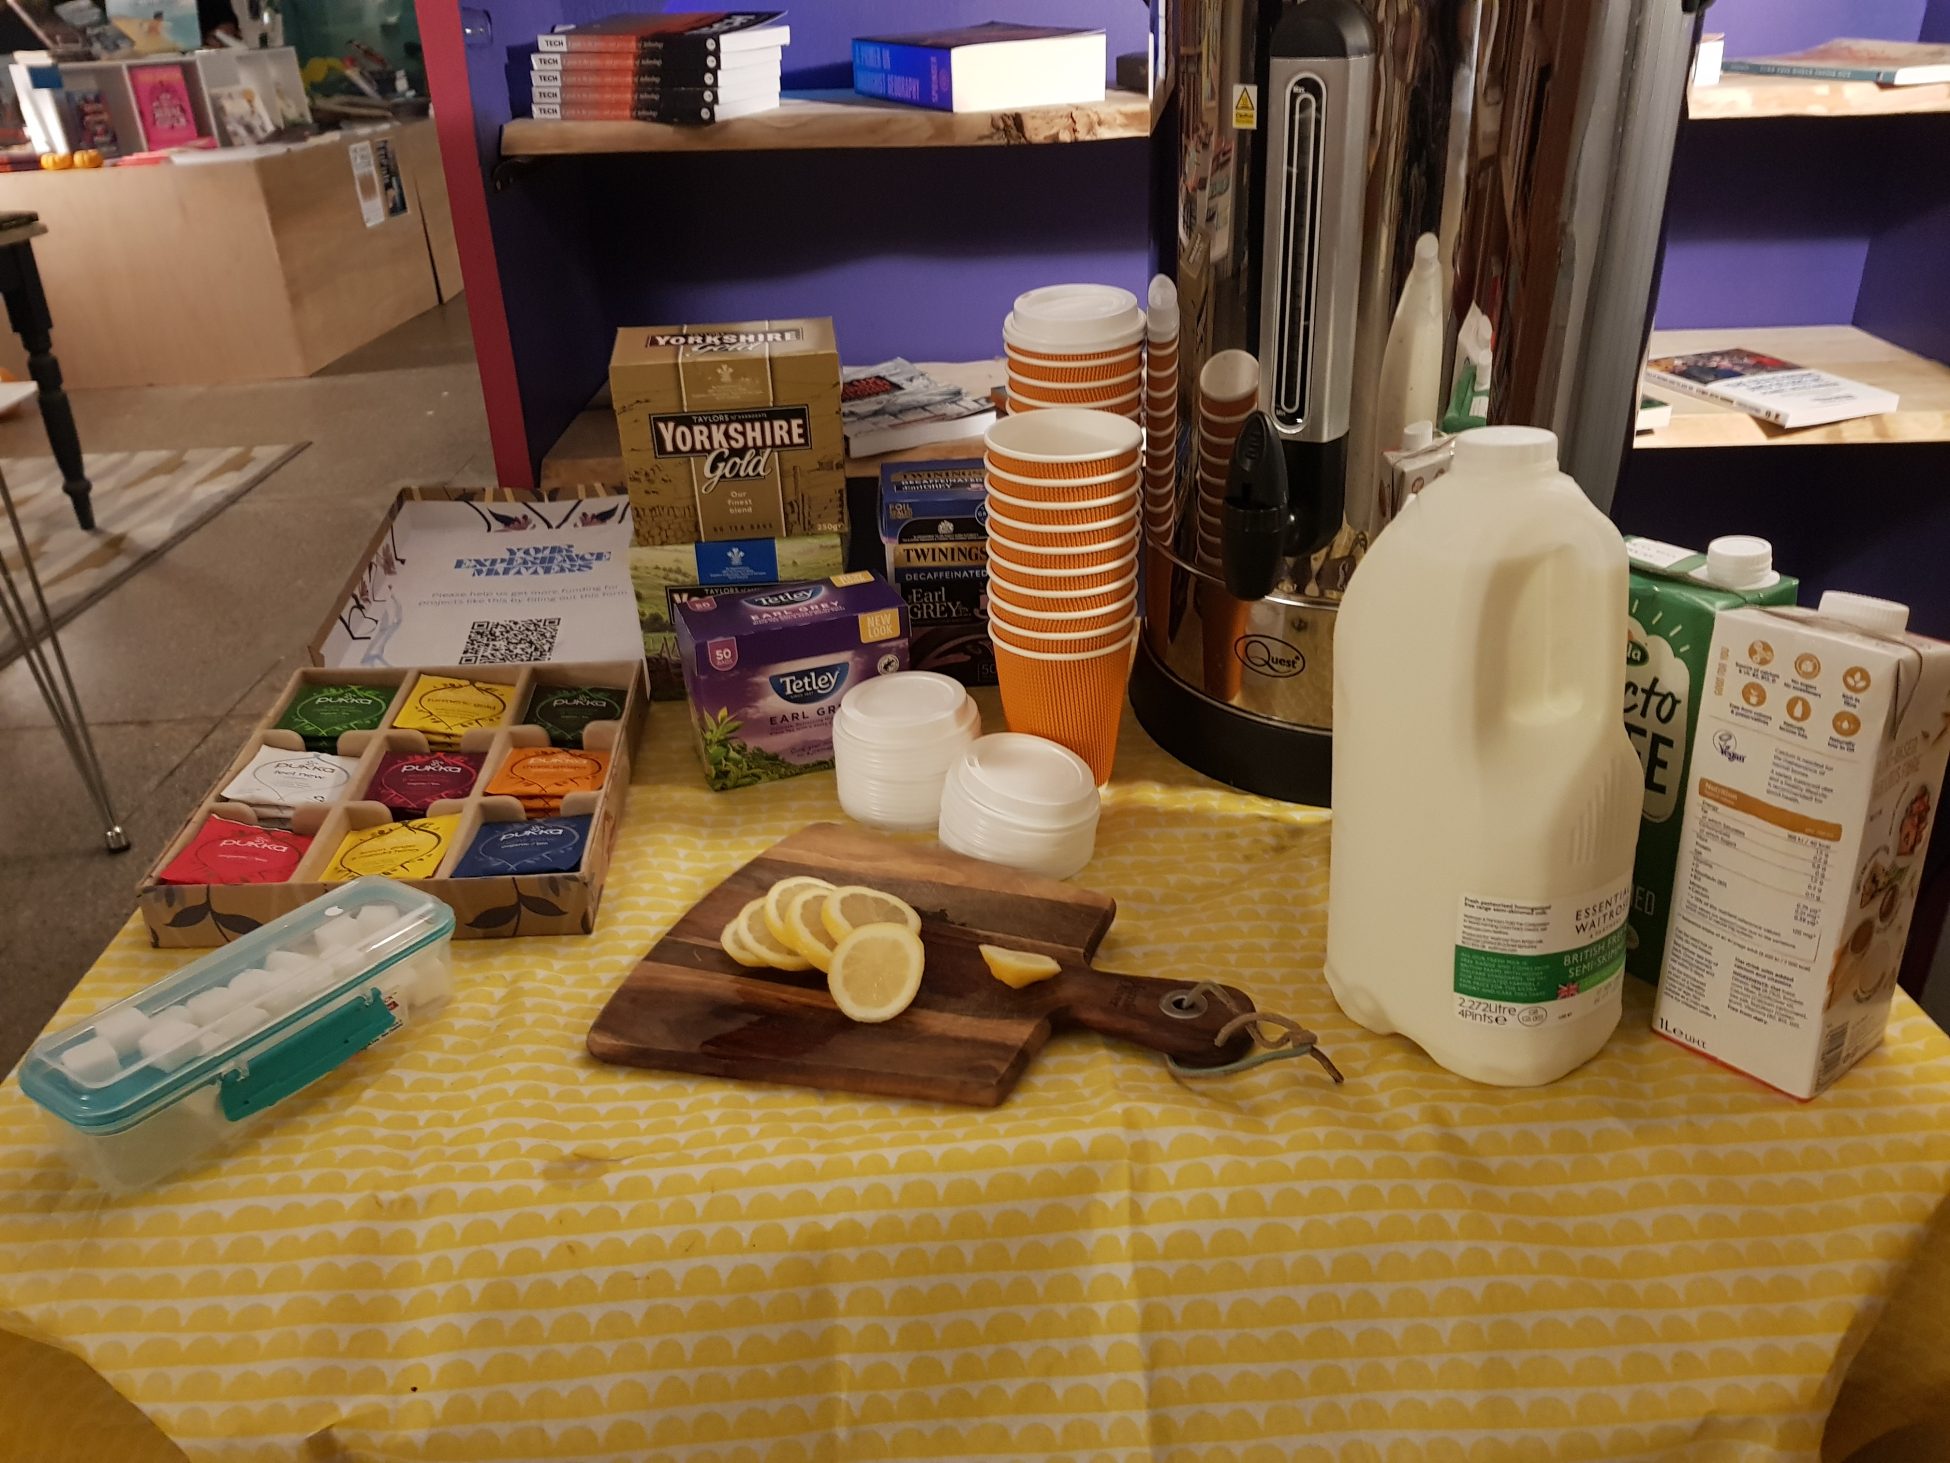 Photo of a small table in front of a shelf of books. The table has a vibrant yellow table cloth on it, and a selection of teas and herbal infusions along with a large urn, a selection of milk and non-dairy alternatives, slices of lemon, sugar cubes, and recyclable hot drink cups.